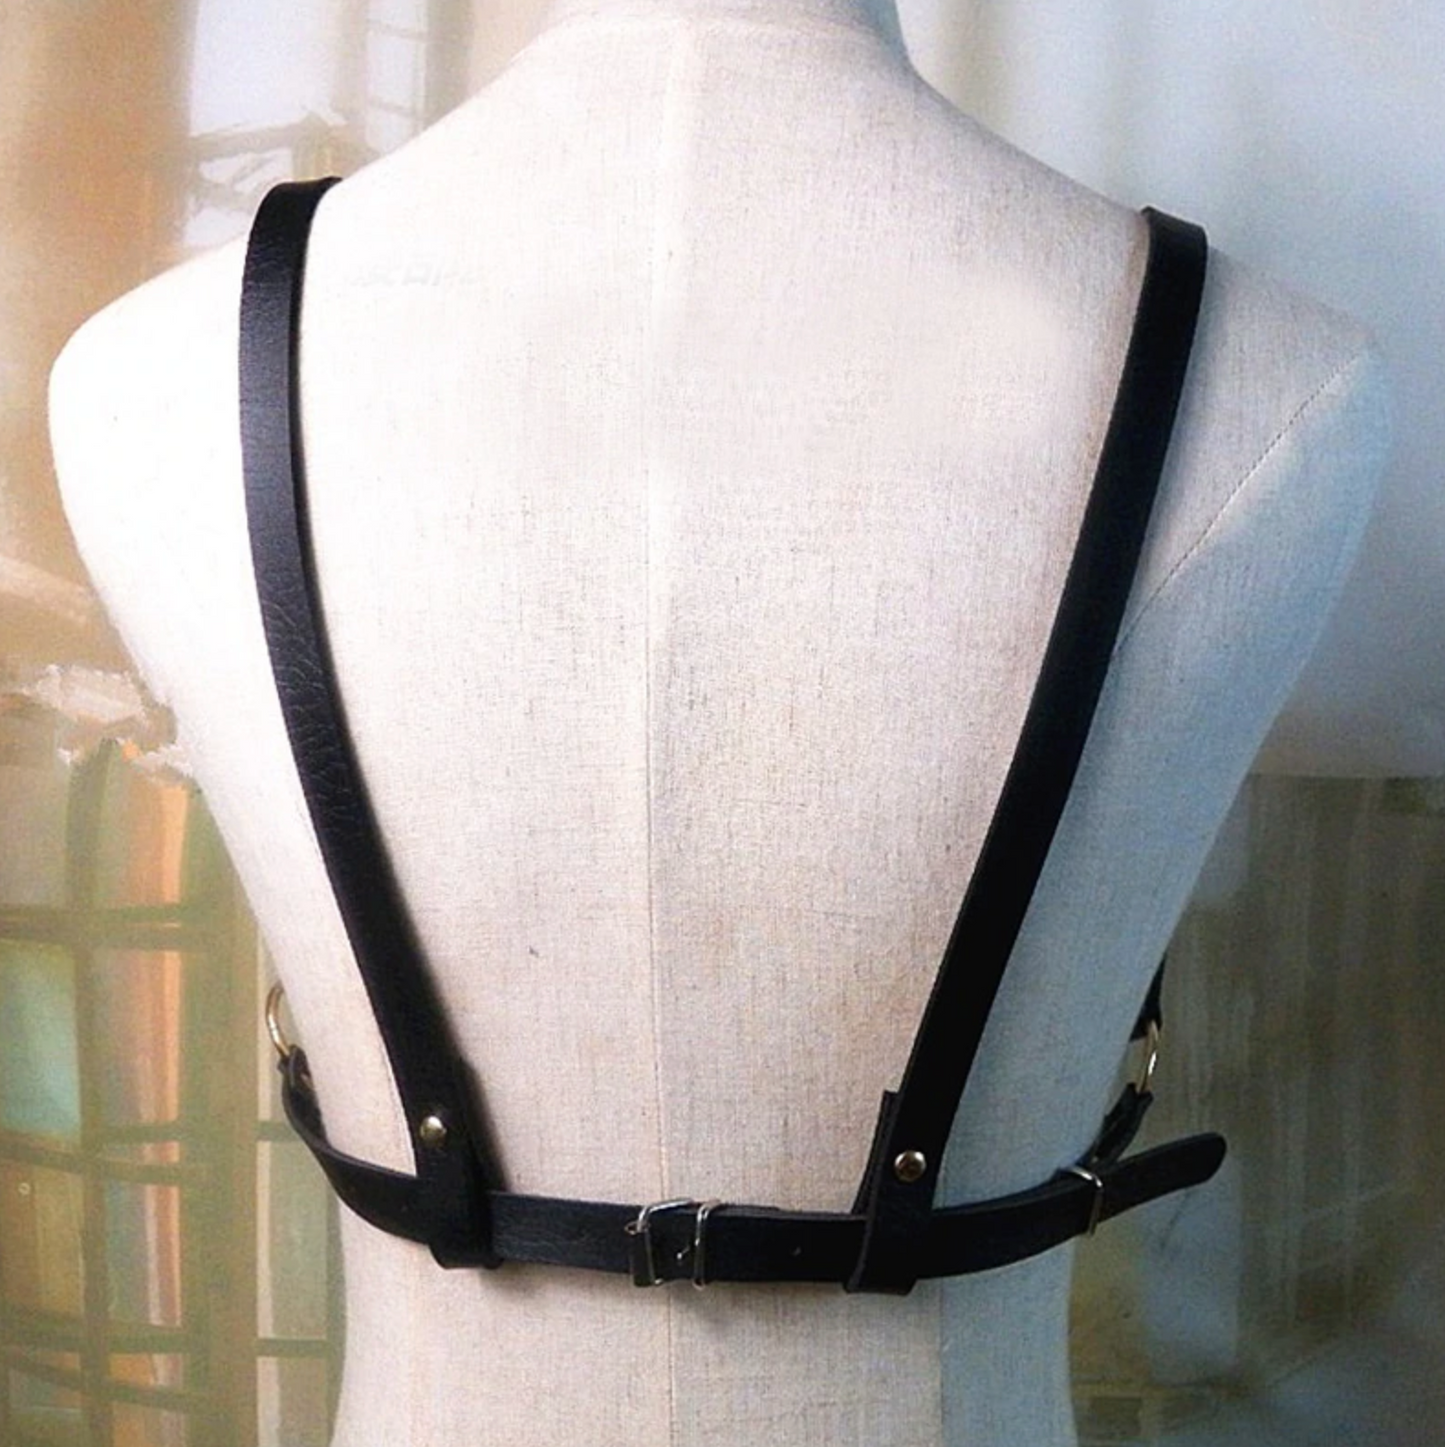 Chest Harness with Gold Chain